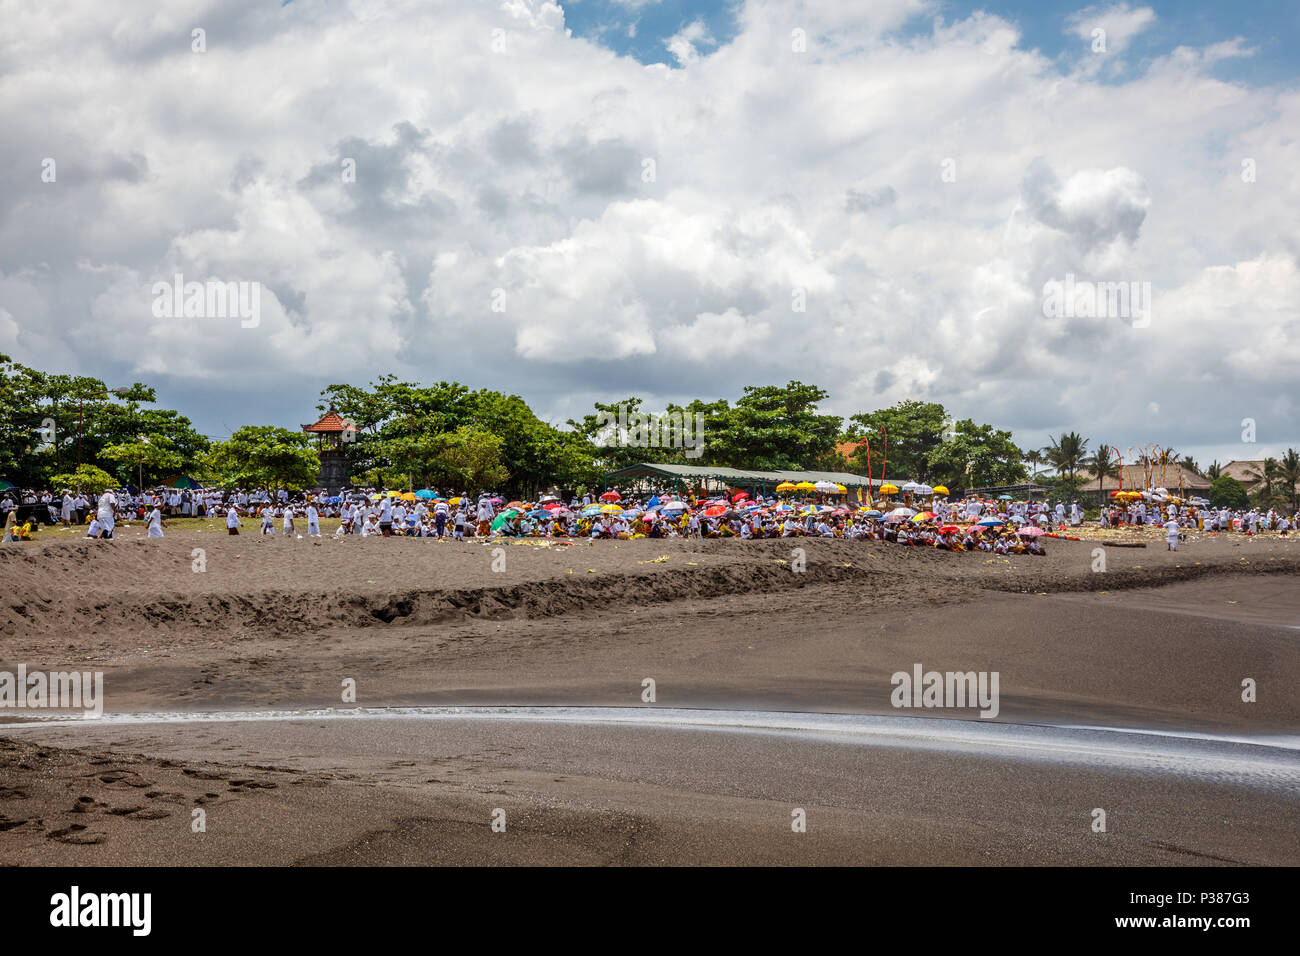 Seseh Beach (Pantai Seseh), Bali, Indonesia. March, 14, 2018. People praying on the beach during Melasti, Balinese Hindu ceremony of purification. Stock Photo